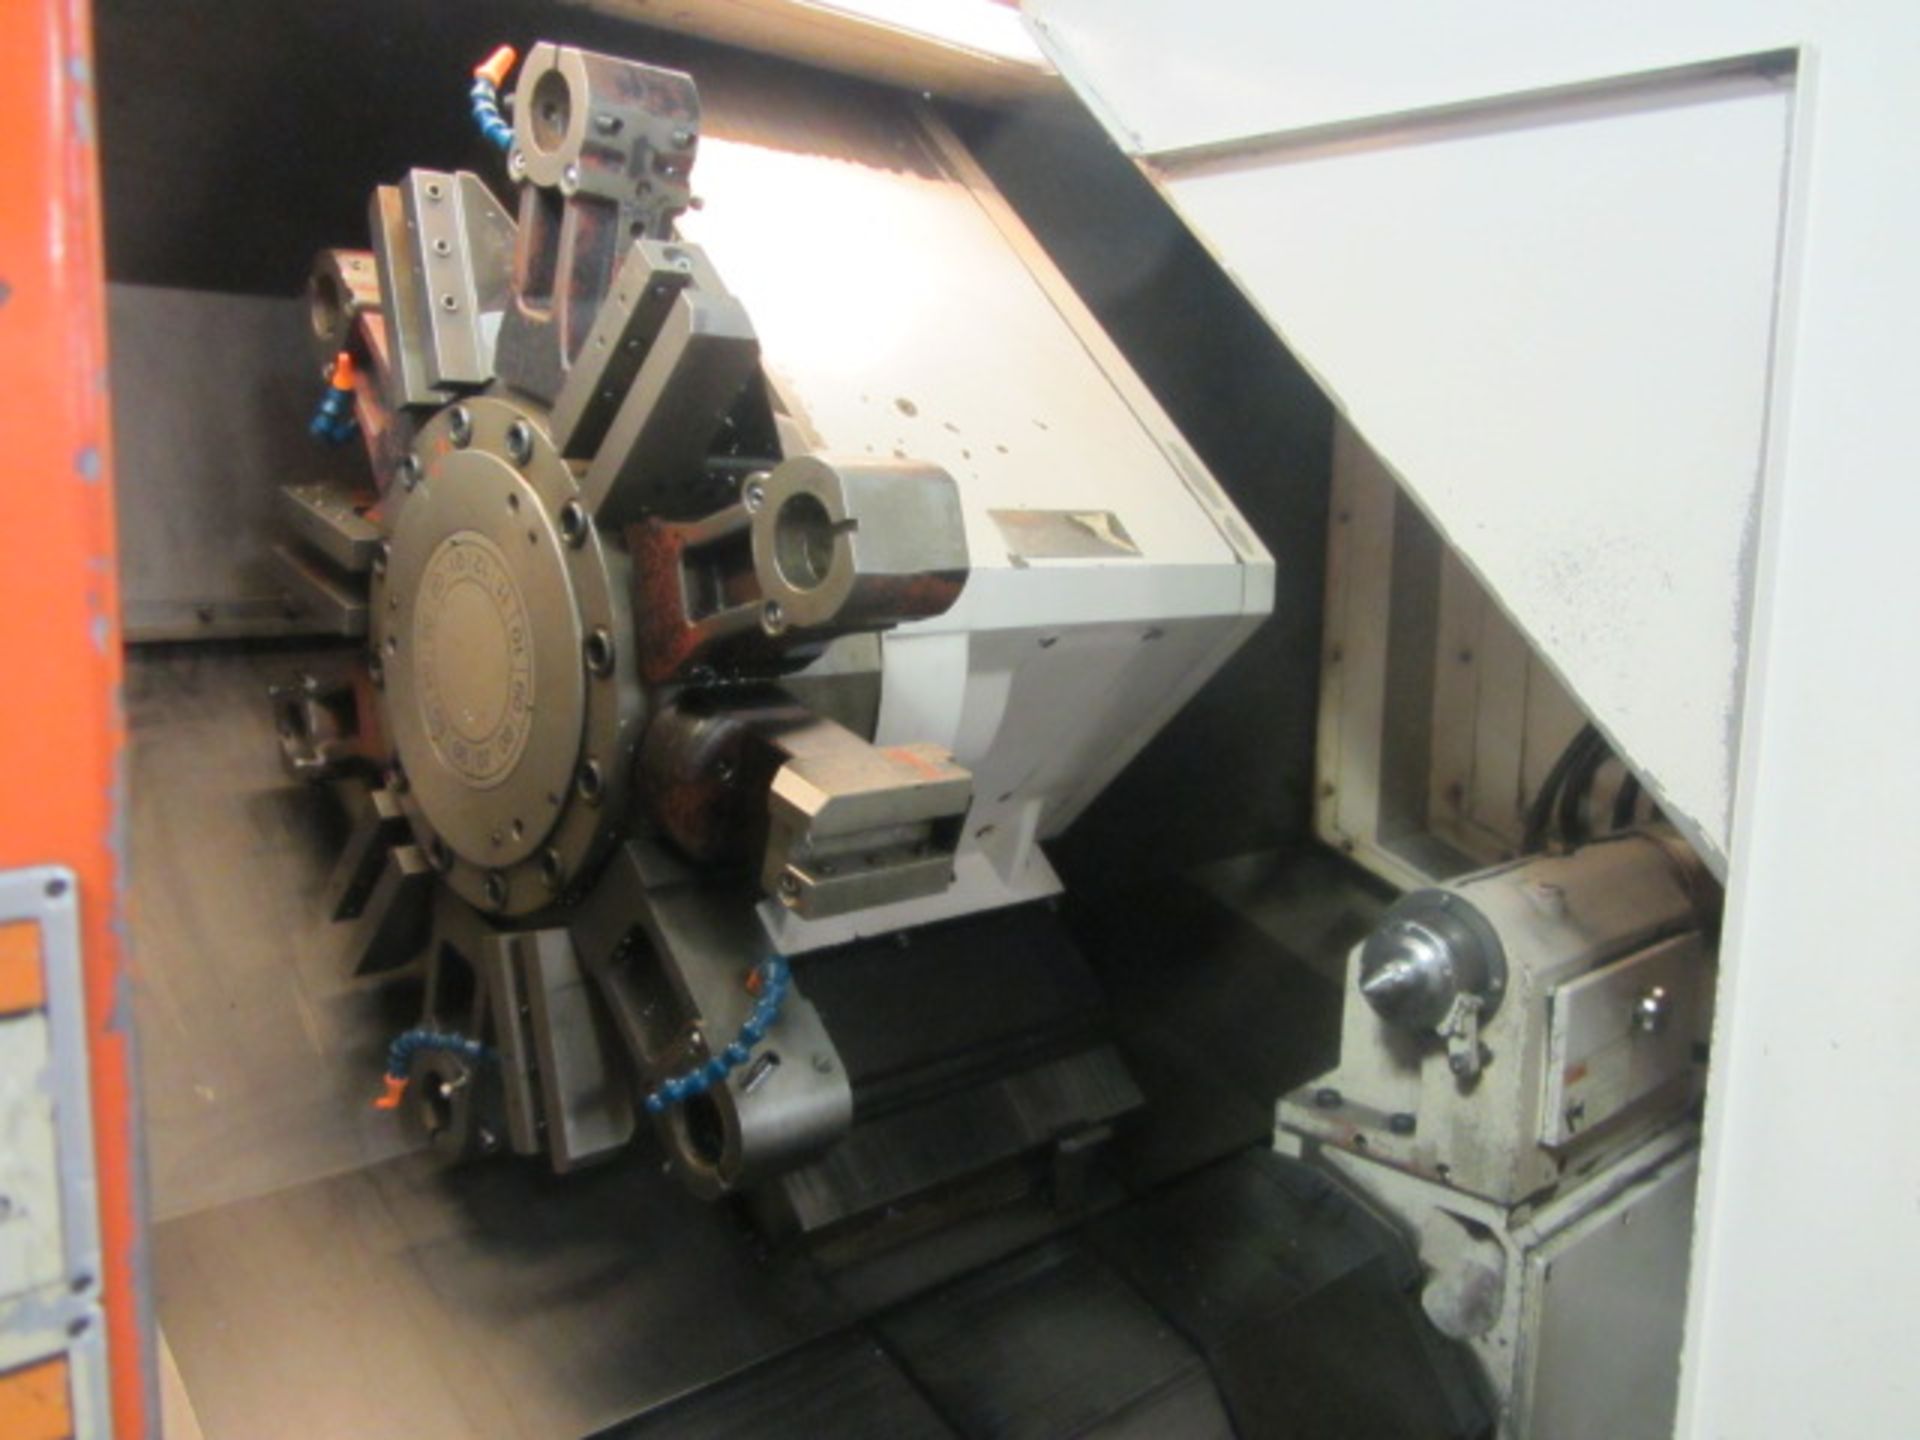 Mazak Model Super Quick Turn 28 2-Axis CNC Turning Center with 20.08'' Swing Over Bed x 40'' - Image 4 of 7